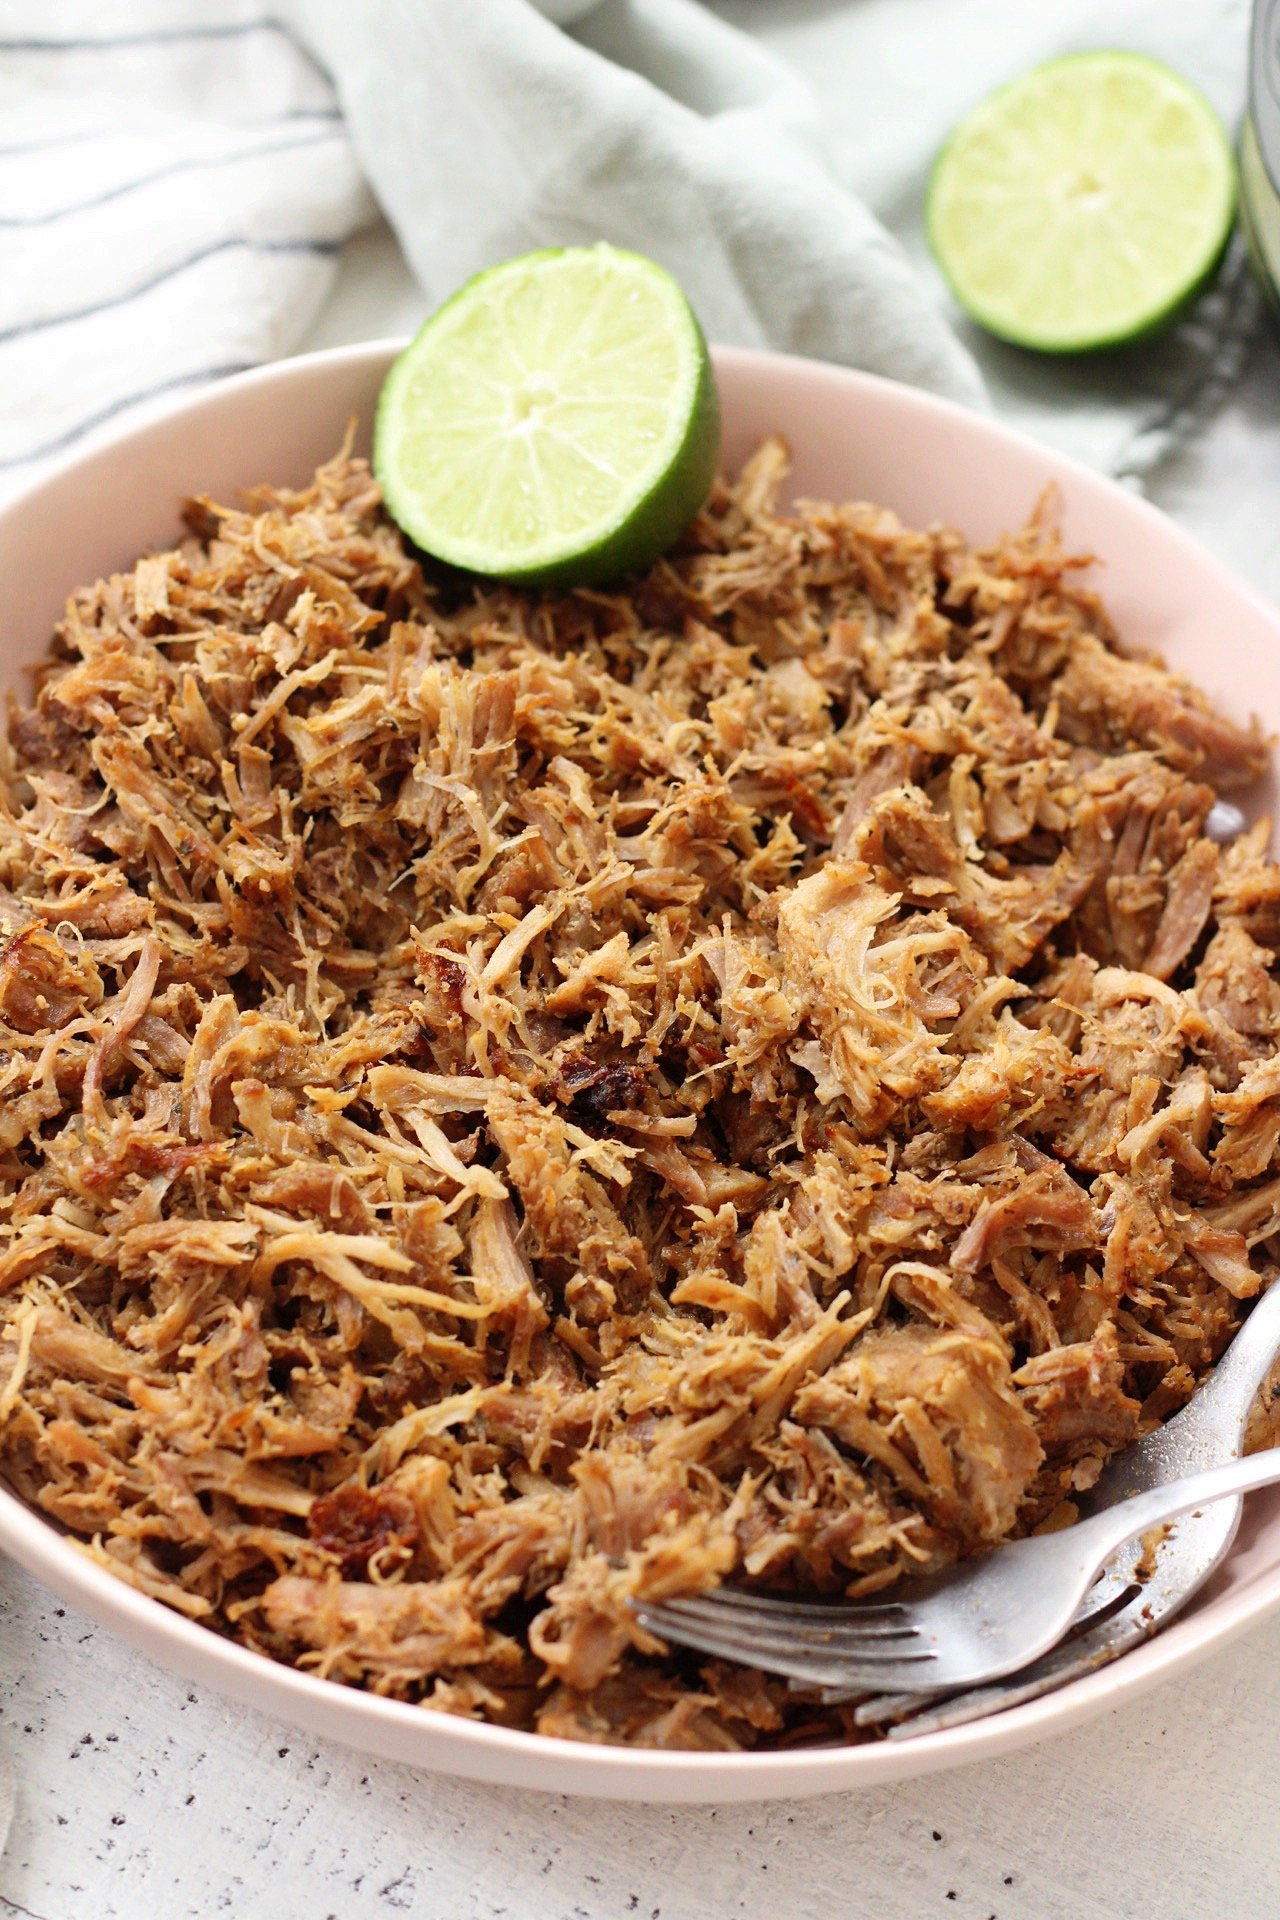 Easy Whole30 and Paleo instant pot pork carnitas only take a few simple ingredients and less than an hours time to cook perfectly! This is a great whole30 pork recipe for meal prep, or as a family friendly recipes for tacos or burritos! #paleocarnitas #whole30instantpot #whole30carnitas